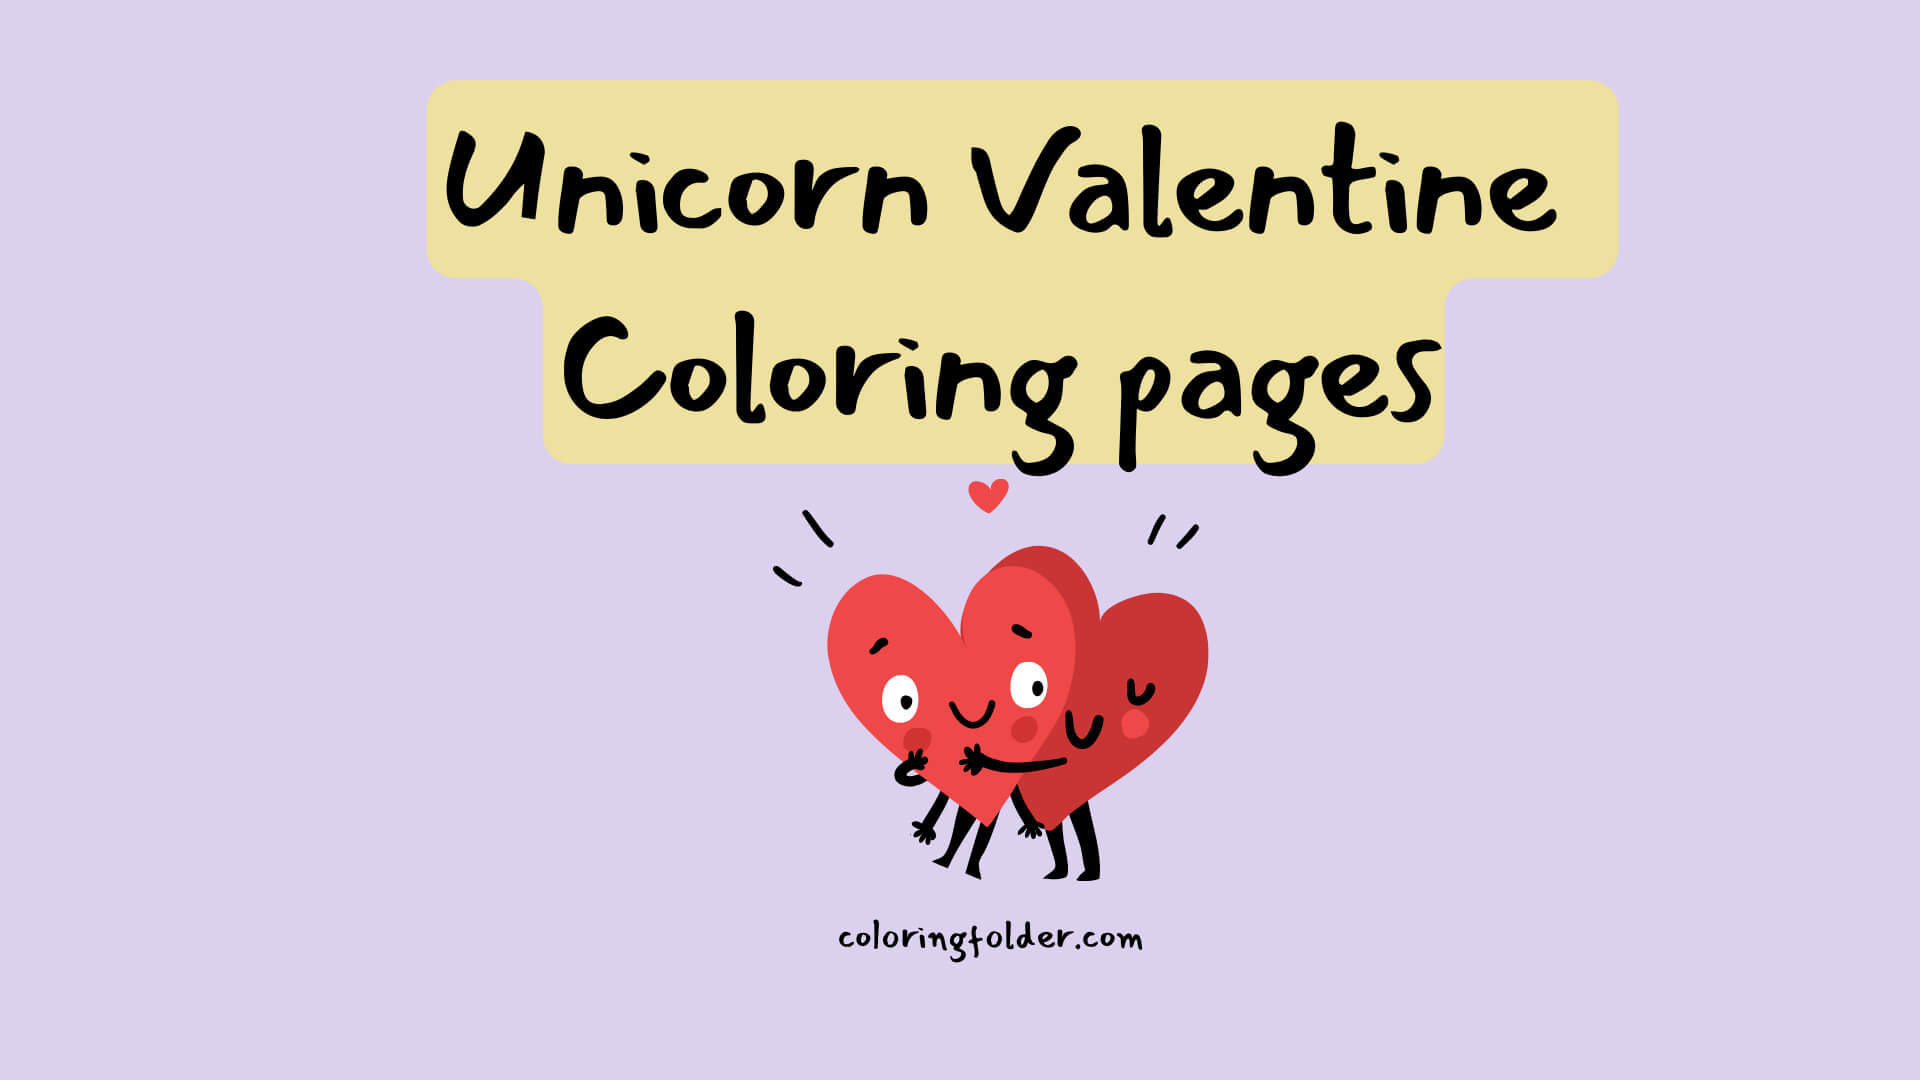 unicorn valentine coloring pages